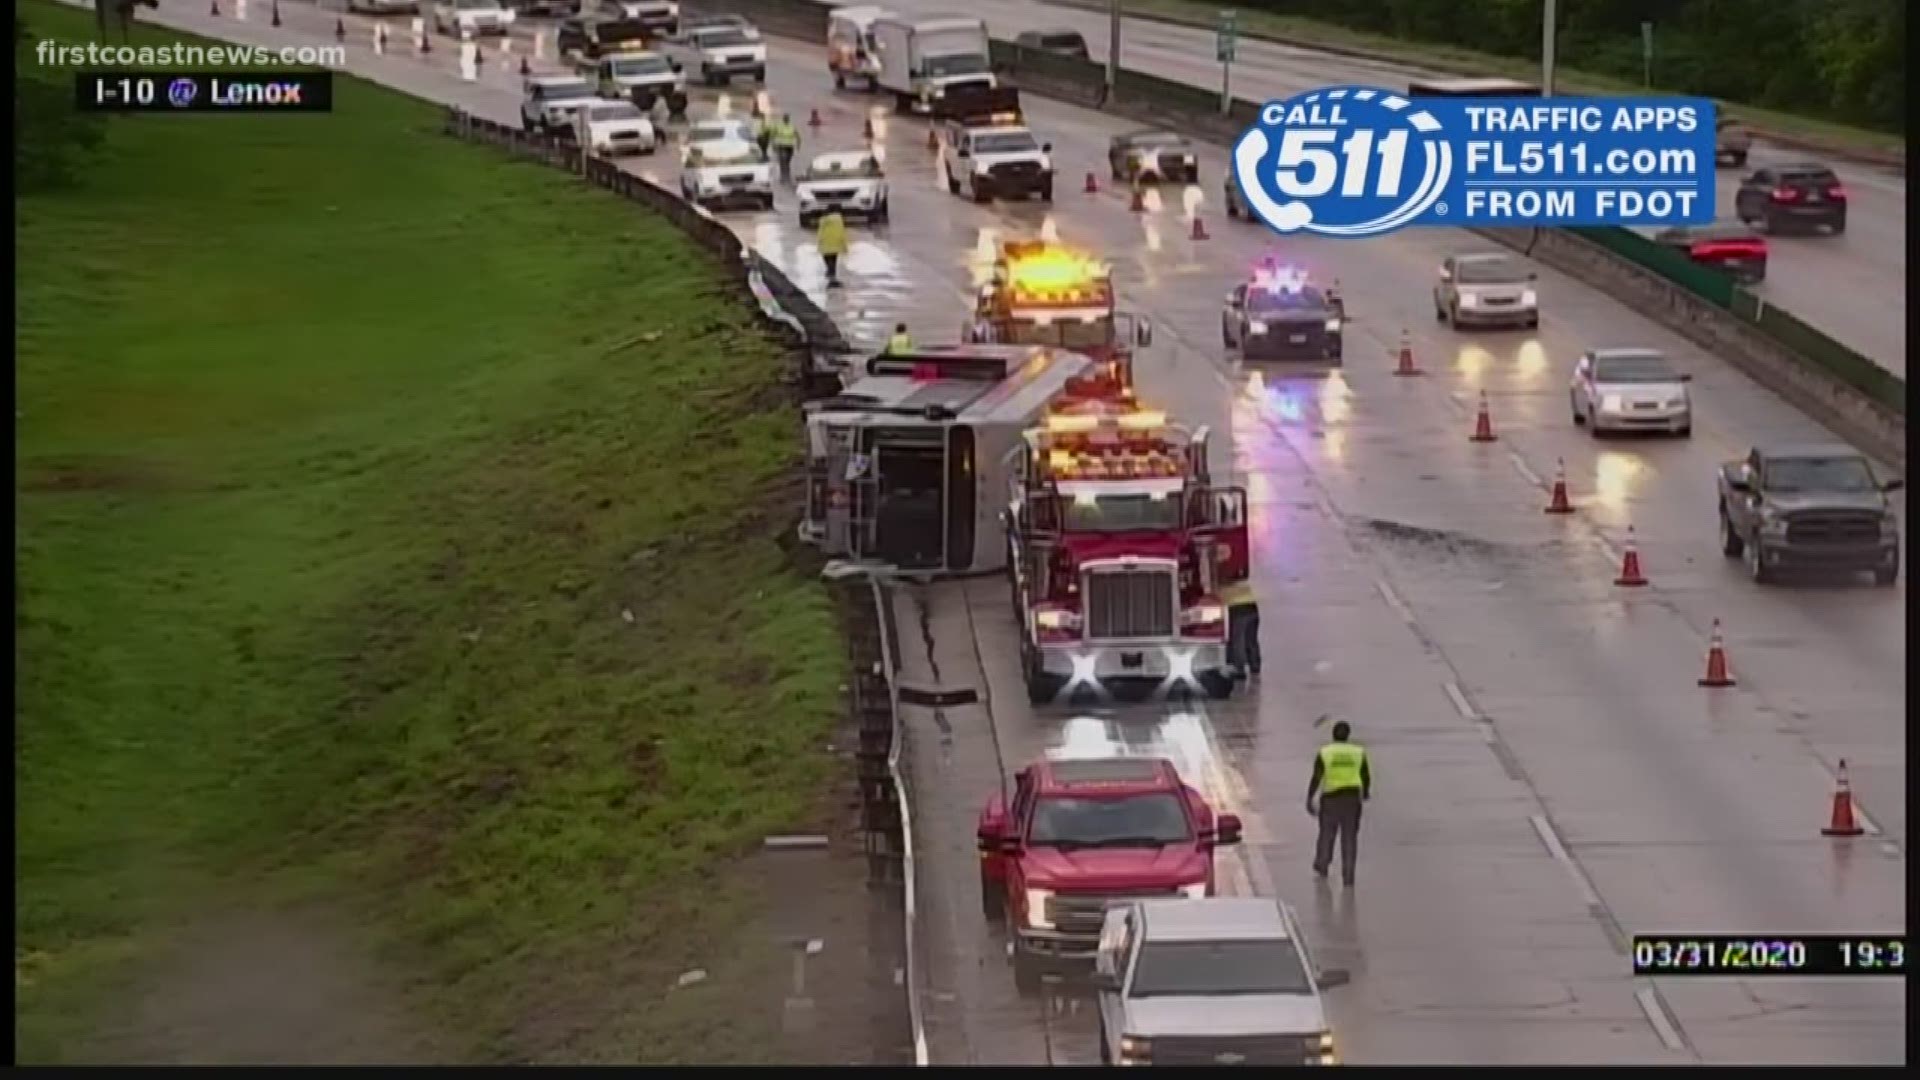 The driver of the JTA bus was taken to the hospital with minor injuries after hydroplaning, hitting a guardrail and flipping on I-10, during a heavy downpour.